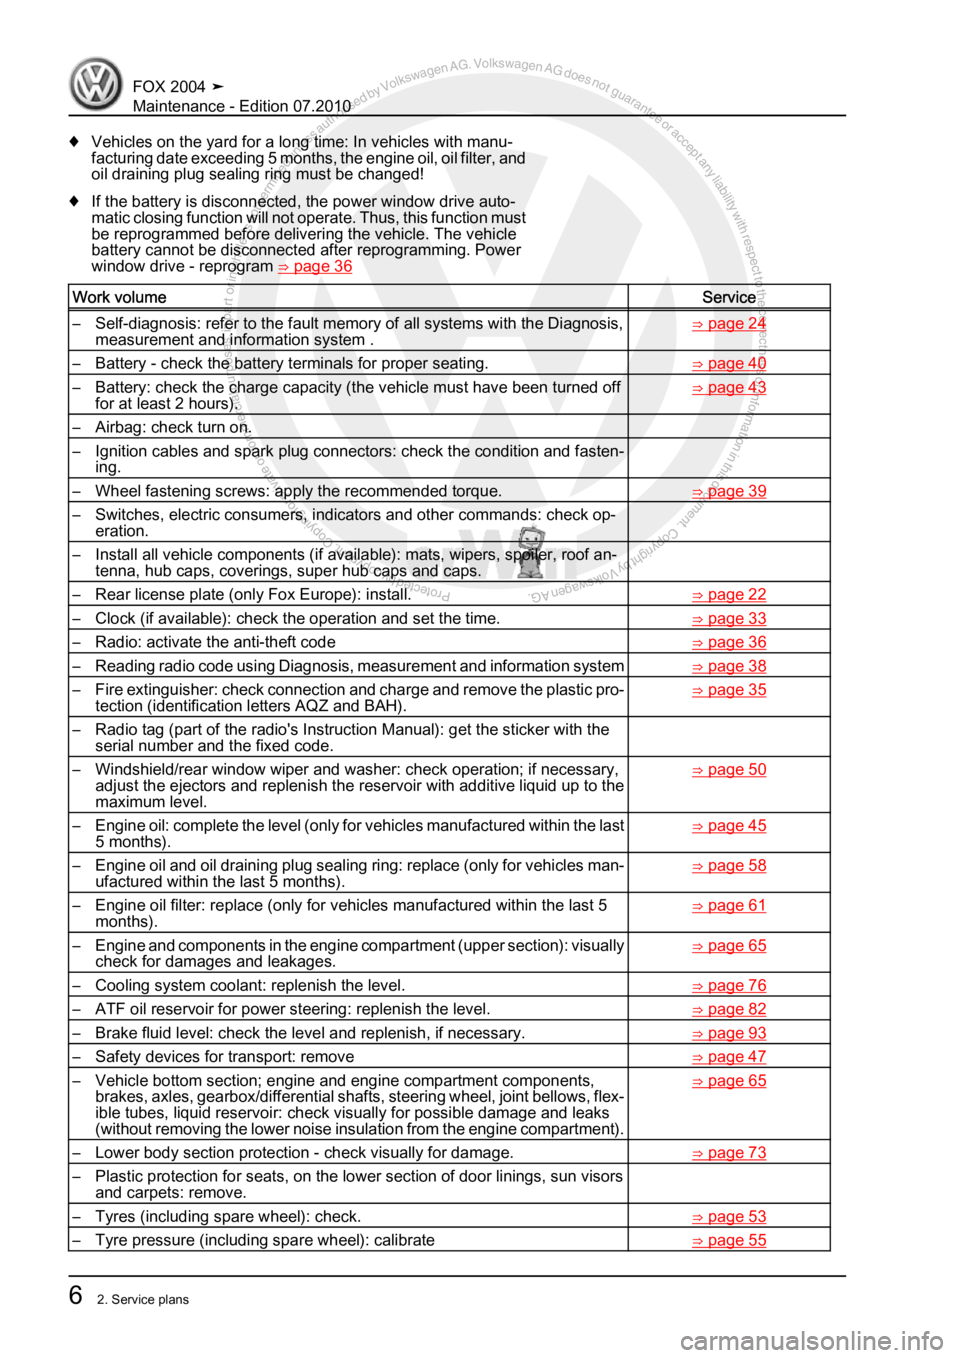 VOLKSWAGEN FOX 2004  Service Manual Protected by copyright. Copying for private or commercial purposes, in partor in whole, is not permitted unless authorised by Volkswagen AG. Volkswagen AG does notguarantee or accept any liability wit